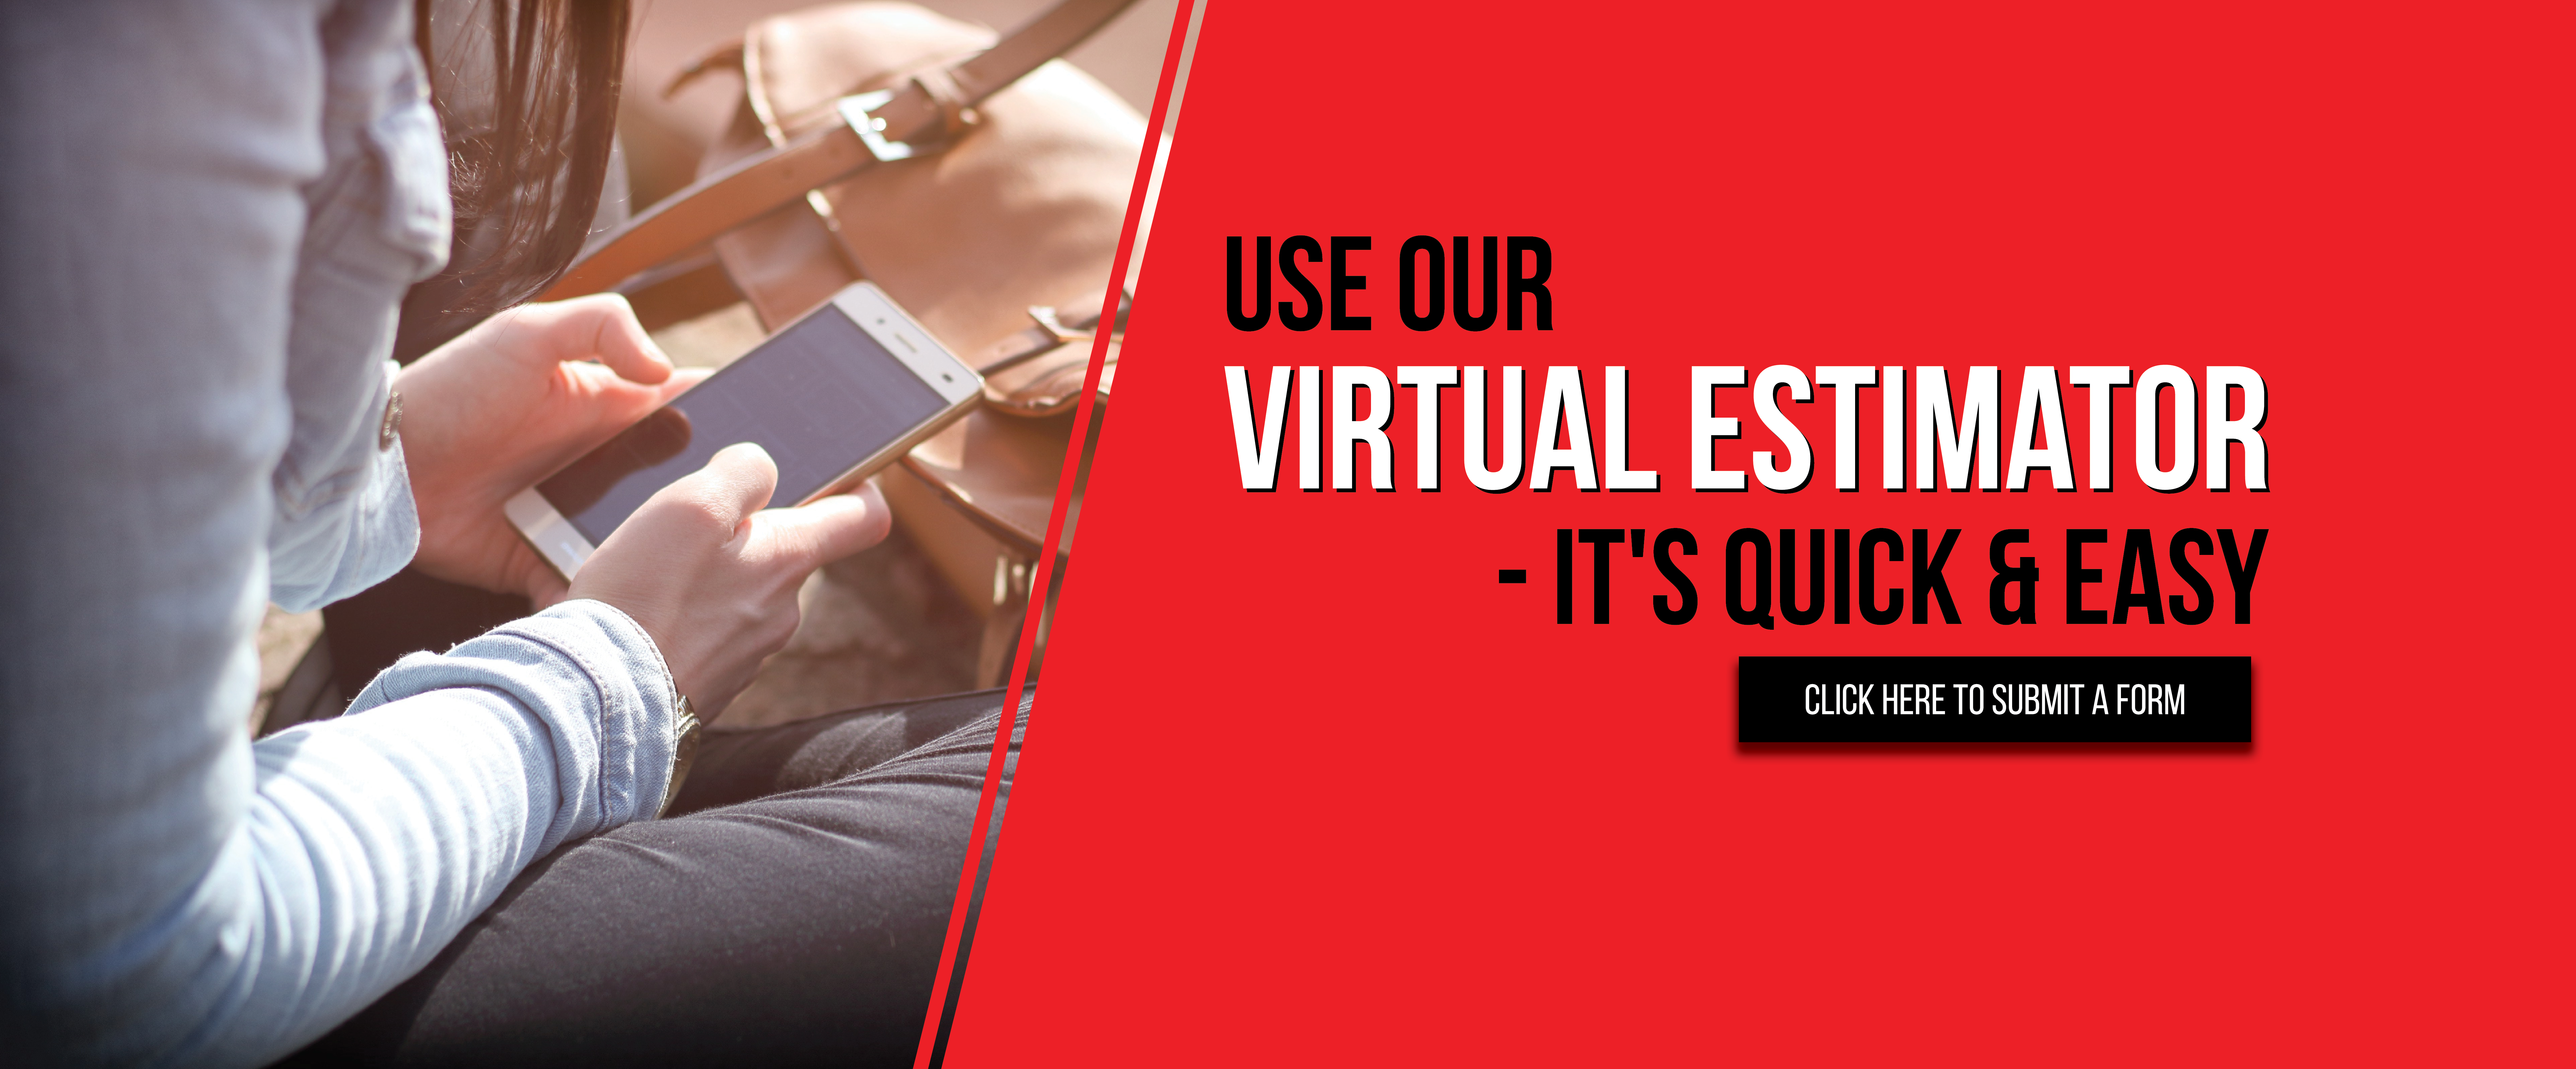 Use Our Virtual Estimator - It's Quick and Easy